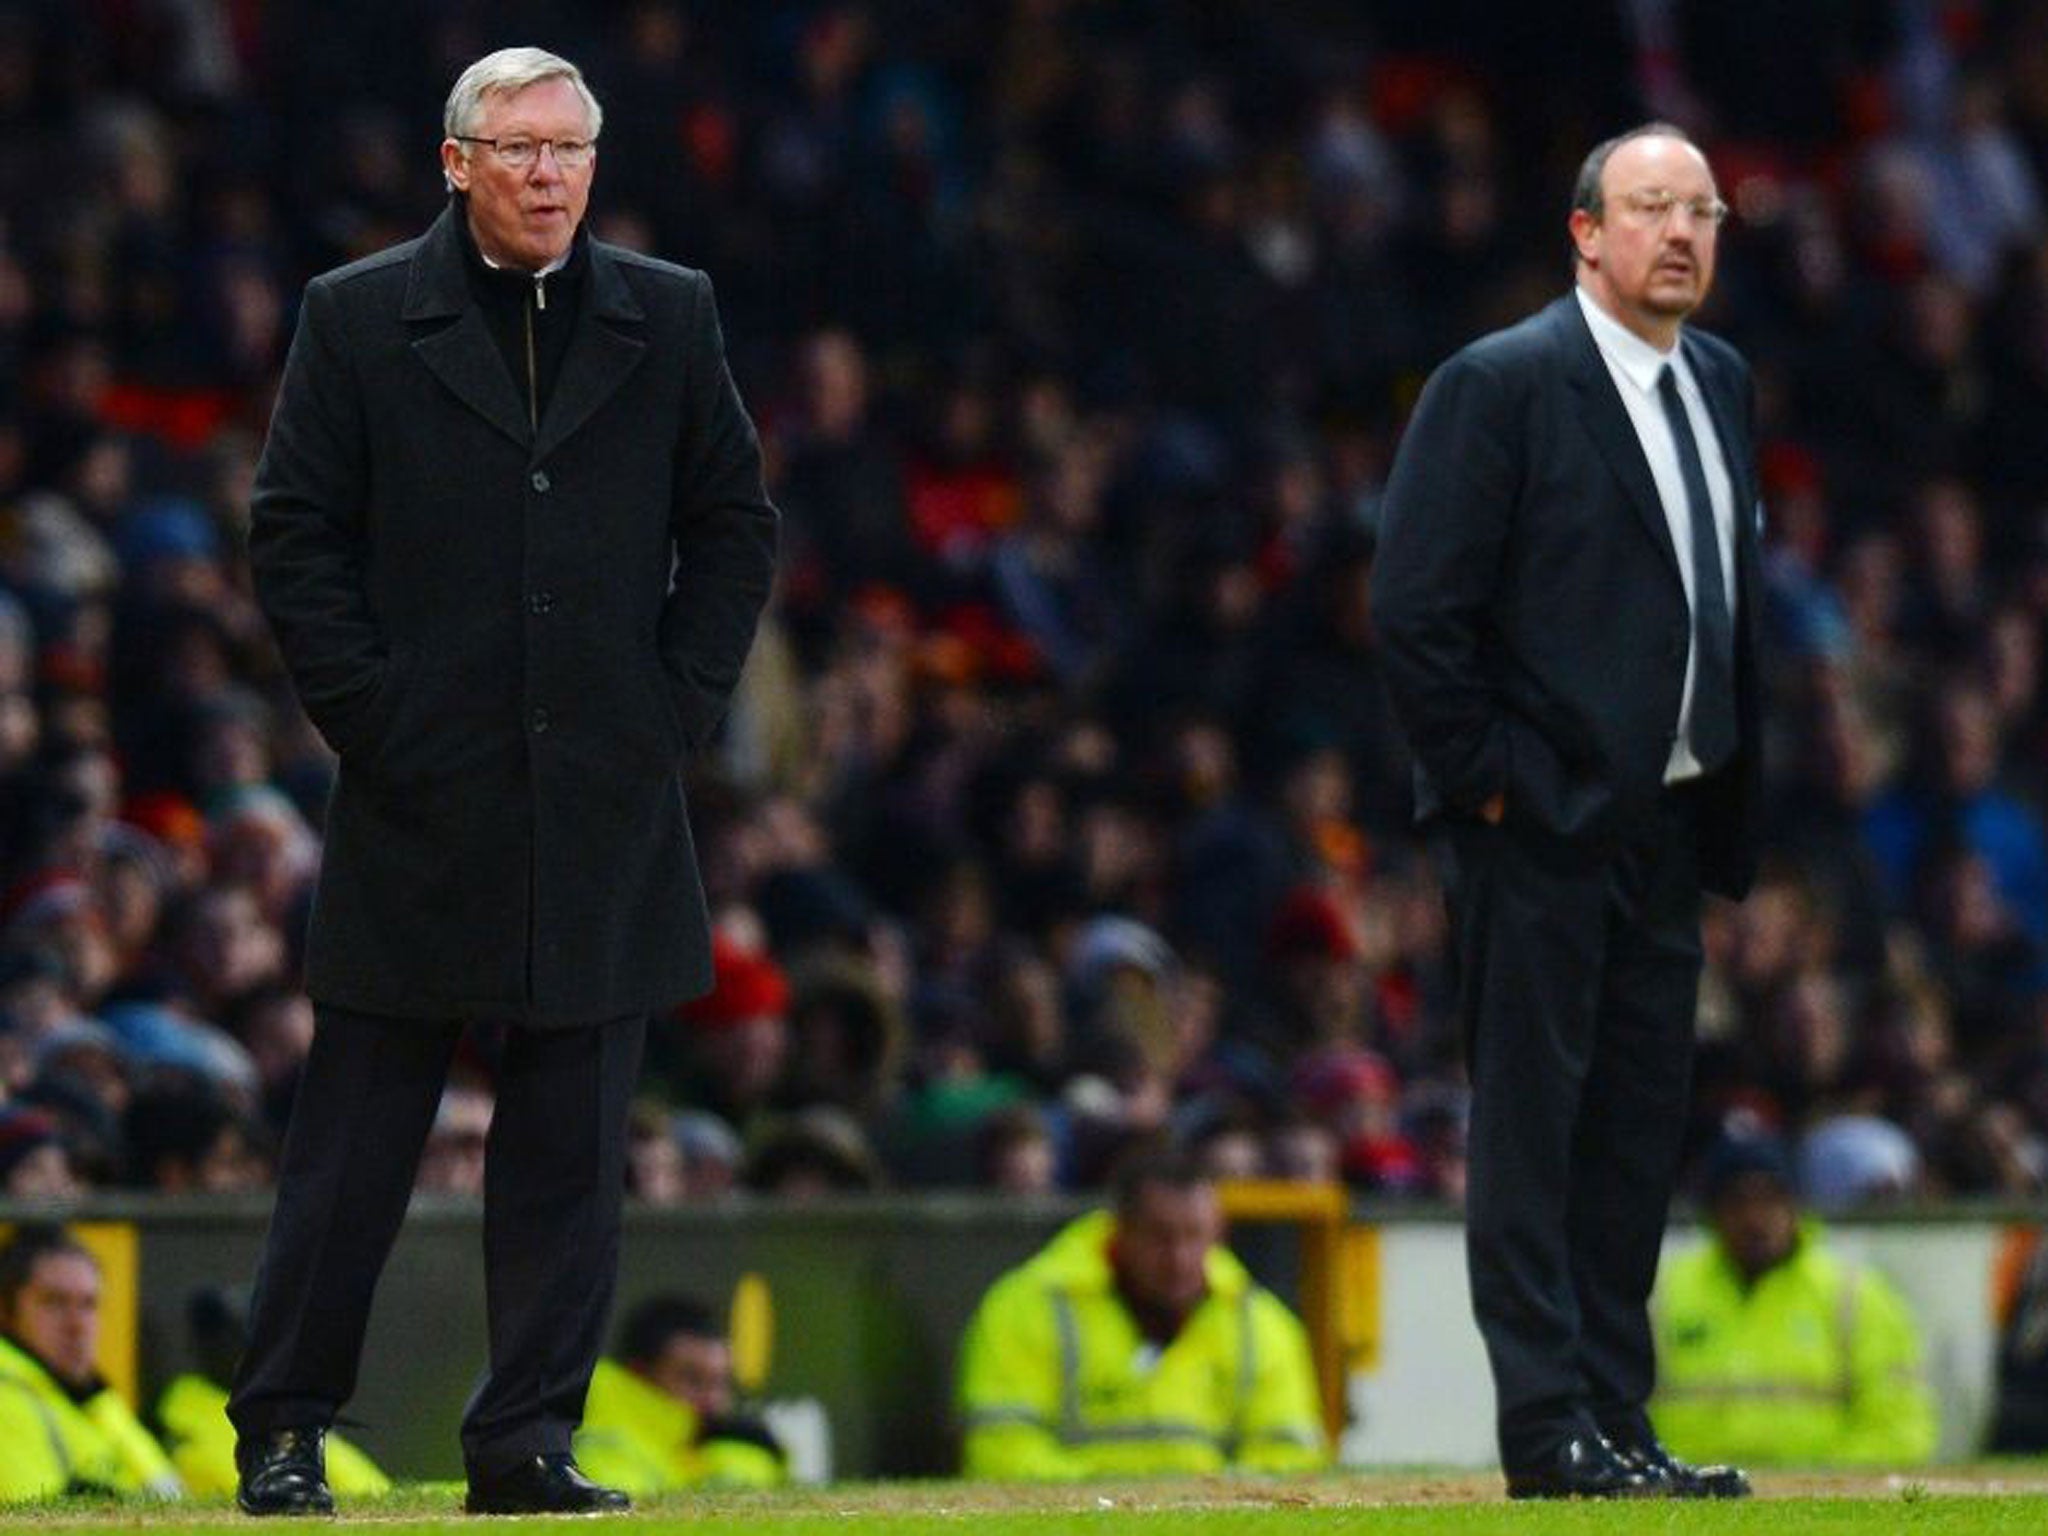 Rafael Benitez (right) poured scorn on Sir Alex Ferguson’s claim that the exertions of playing Real Madrid caused Manchester United's collapse against Chelsea